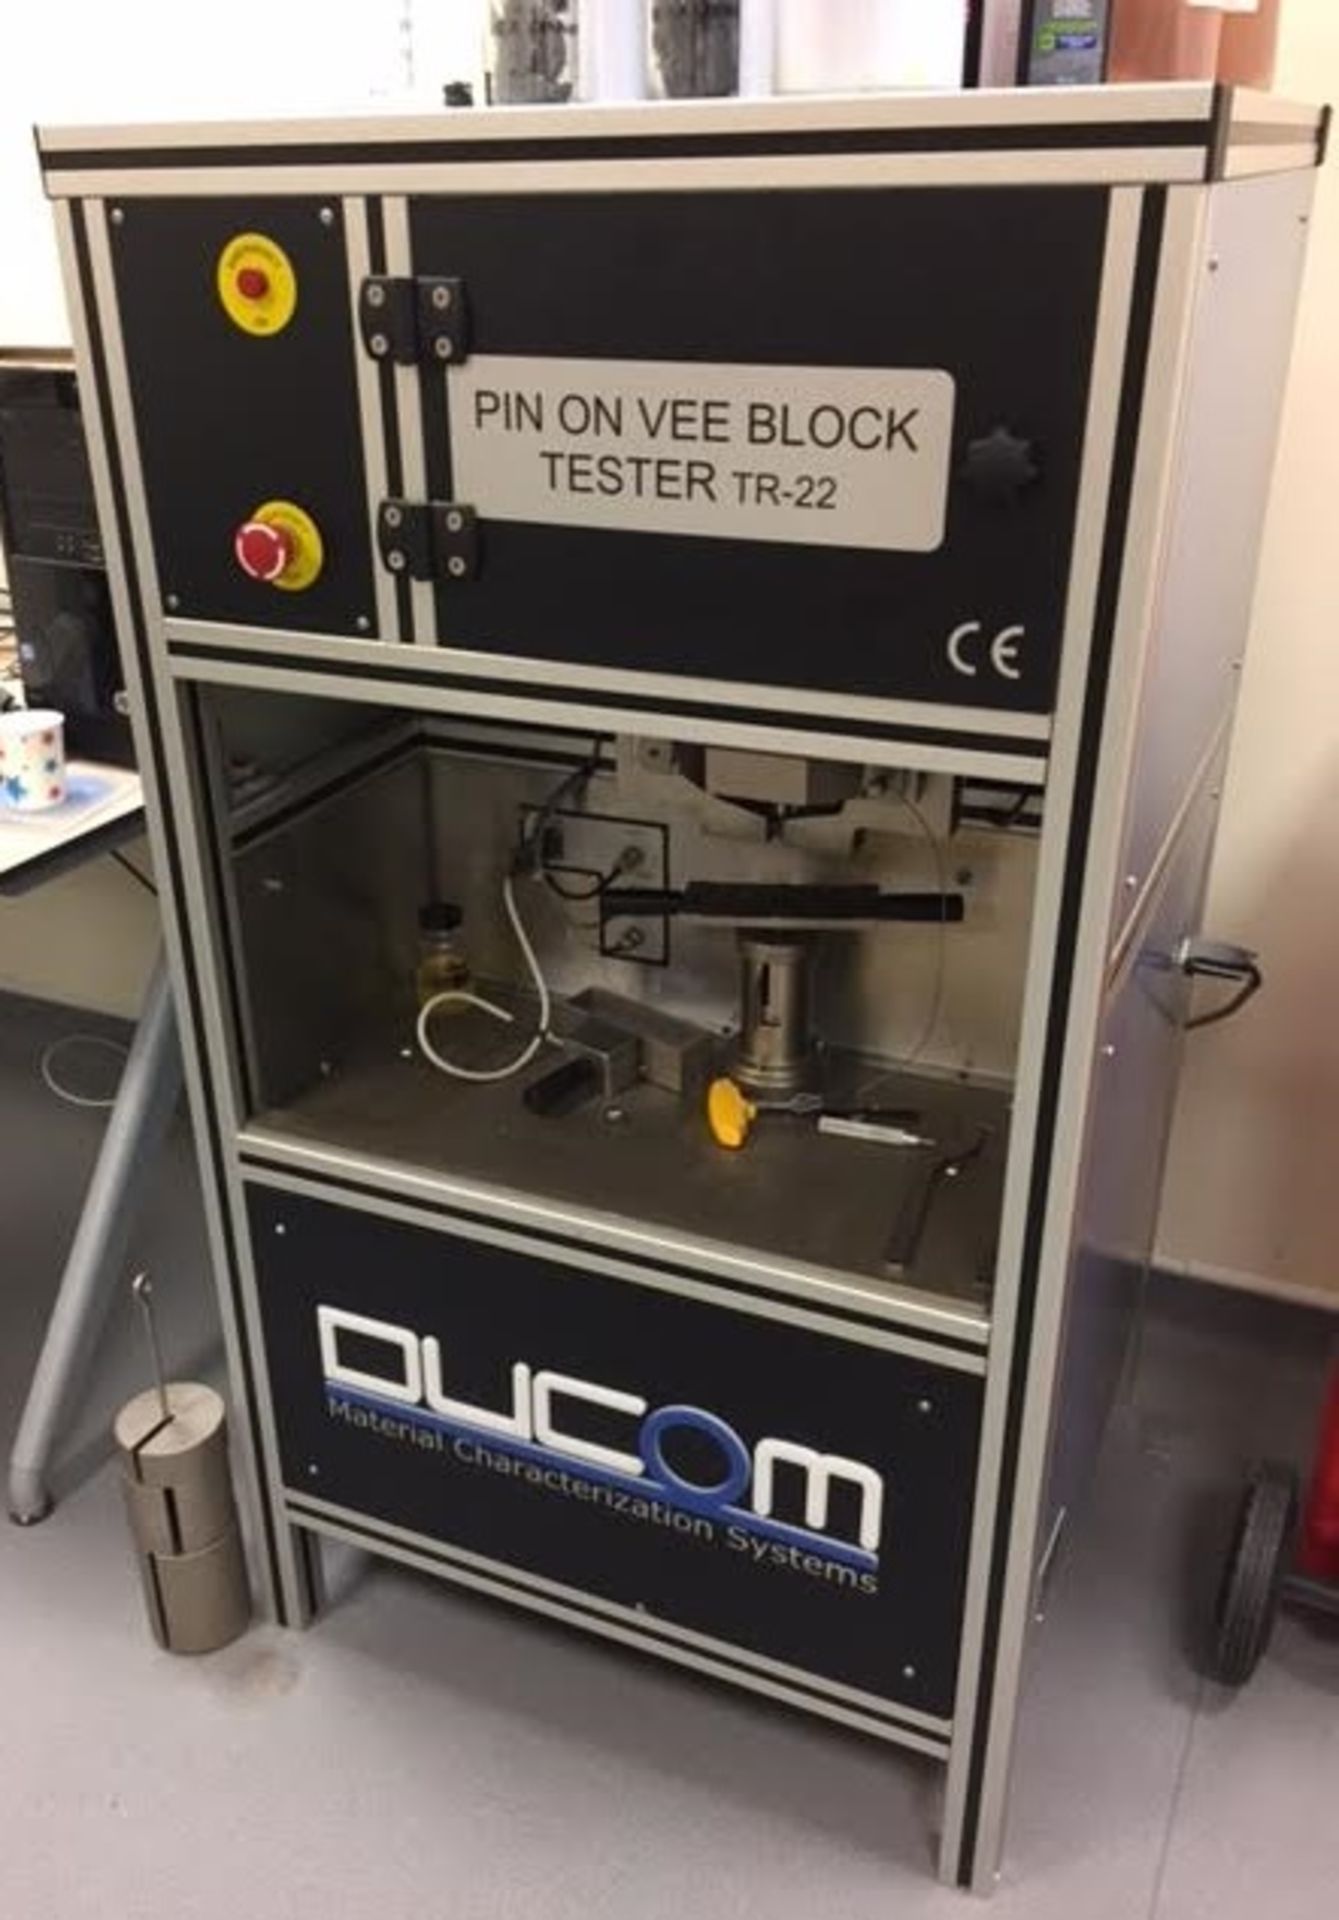 1 x Ducom TR22 Pin and Vee Block Tester - Used to Evaluate Wear Preventive and Load Carrying